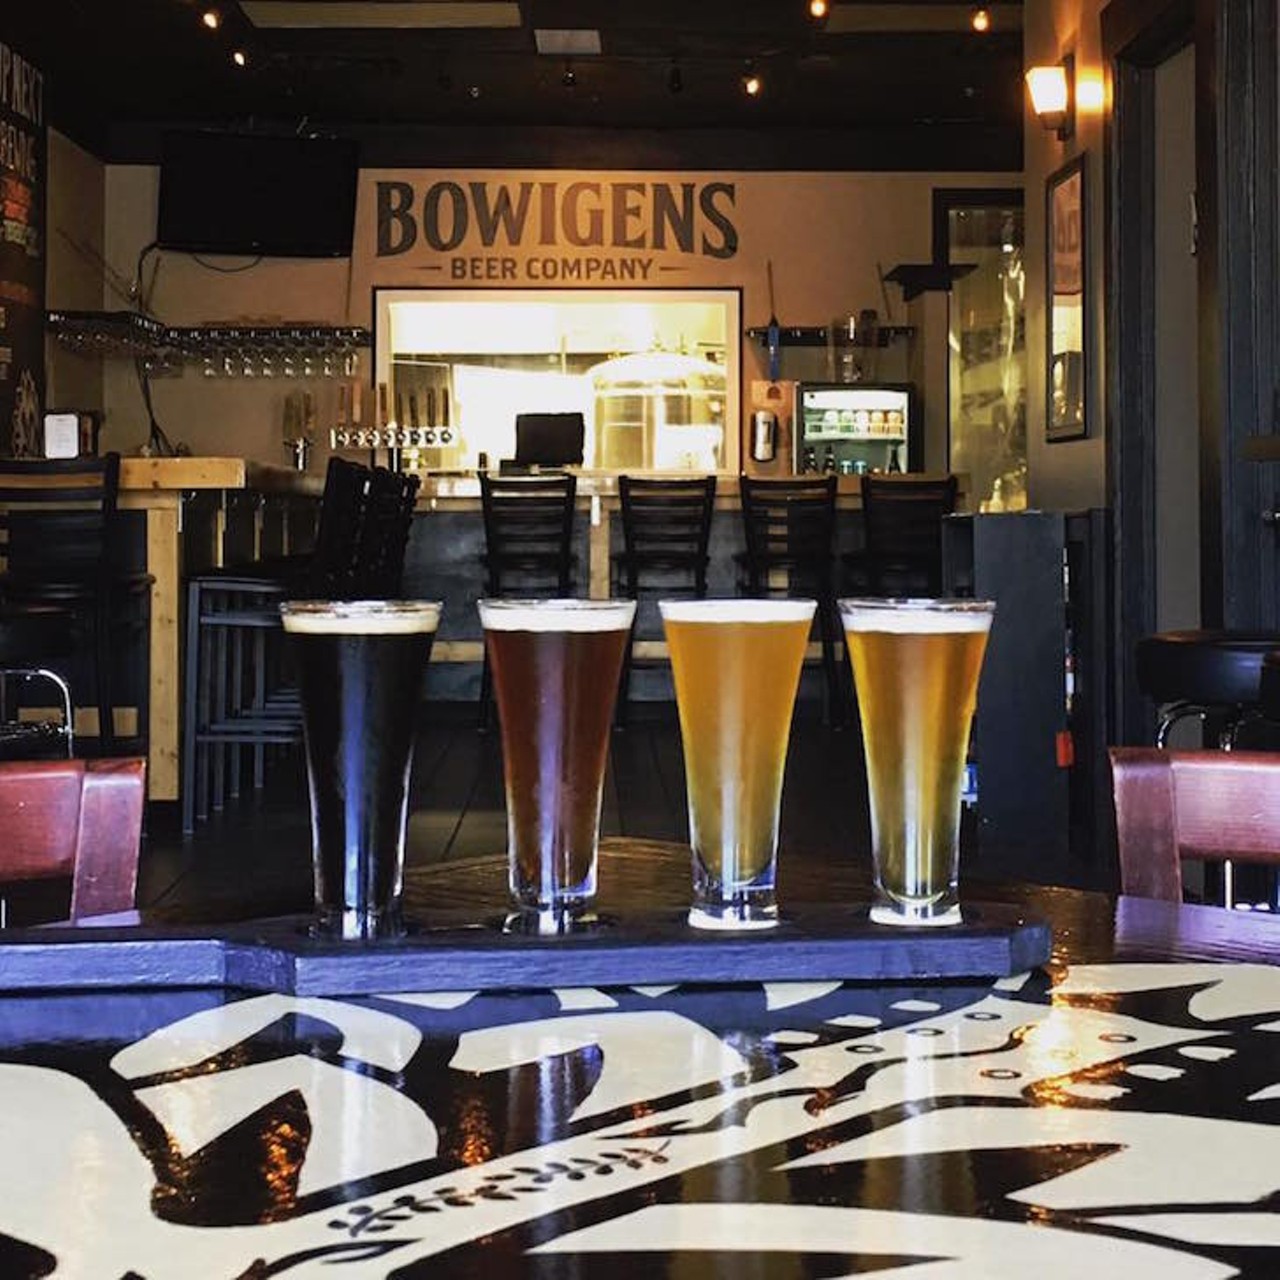 Bowigens Beer Company 
1014 FL-436, Casselberry, 407-960-7816
From Bow9 Citrus Pale Ale to 7 Layer Milk Stout, Bowigens serves its cold ones with complementary pretzels and popcorn seven days a week.
Photo via Bowigens Beer Company/Facebook